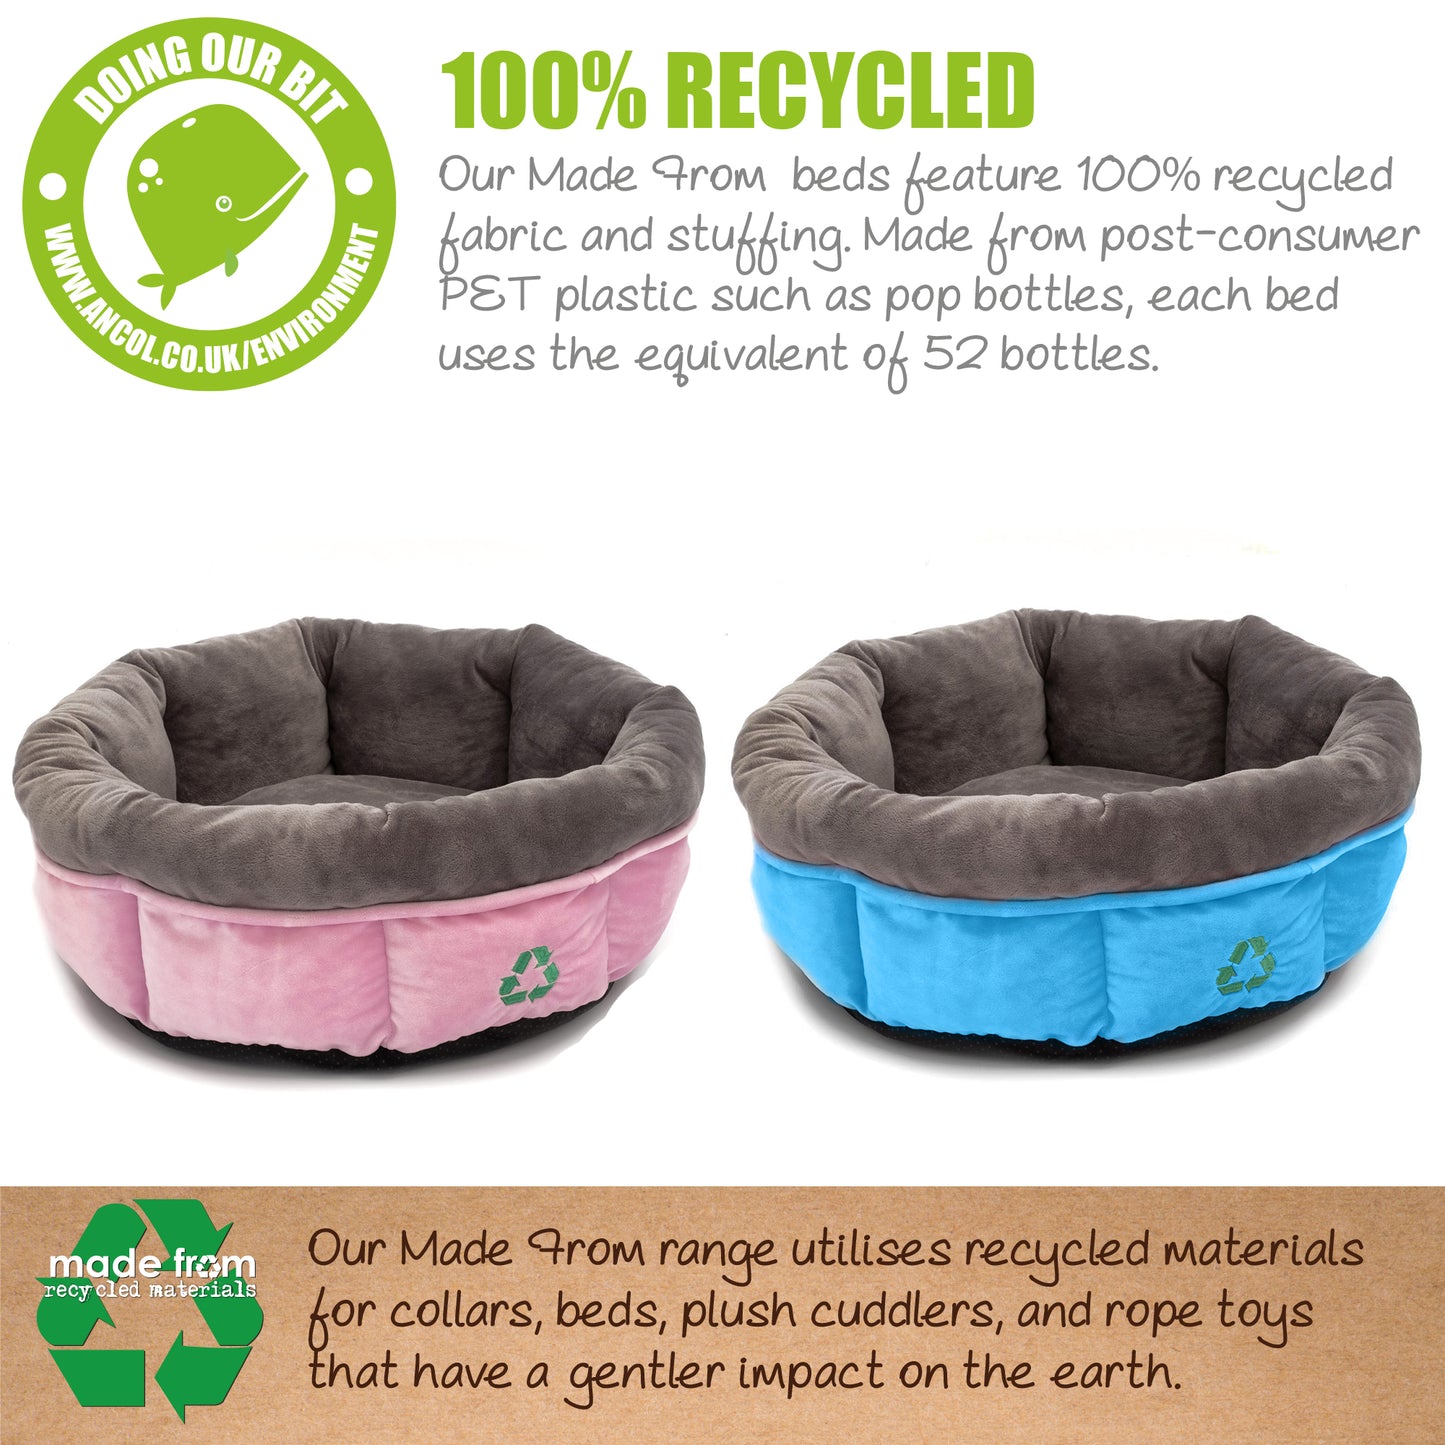 Infographic with two images of plush recycled pet bed in blue or pink. Text explains beds are made from 52 post-consumer PET plastic waste.